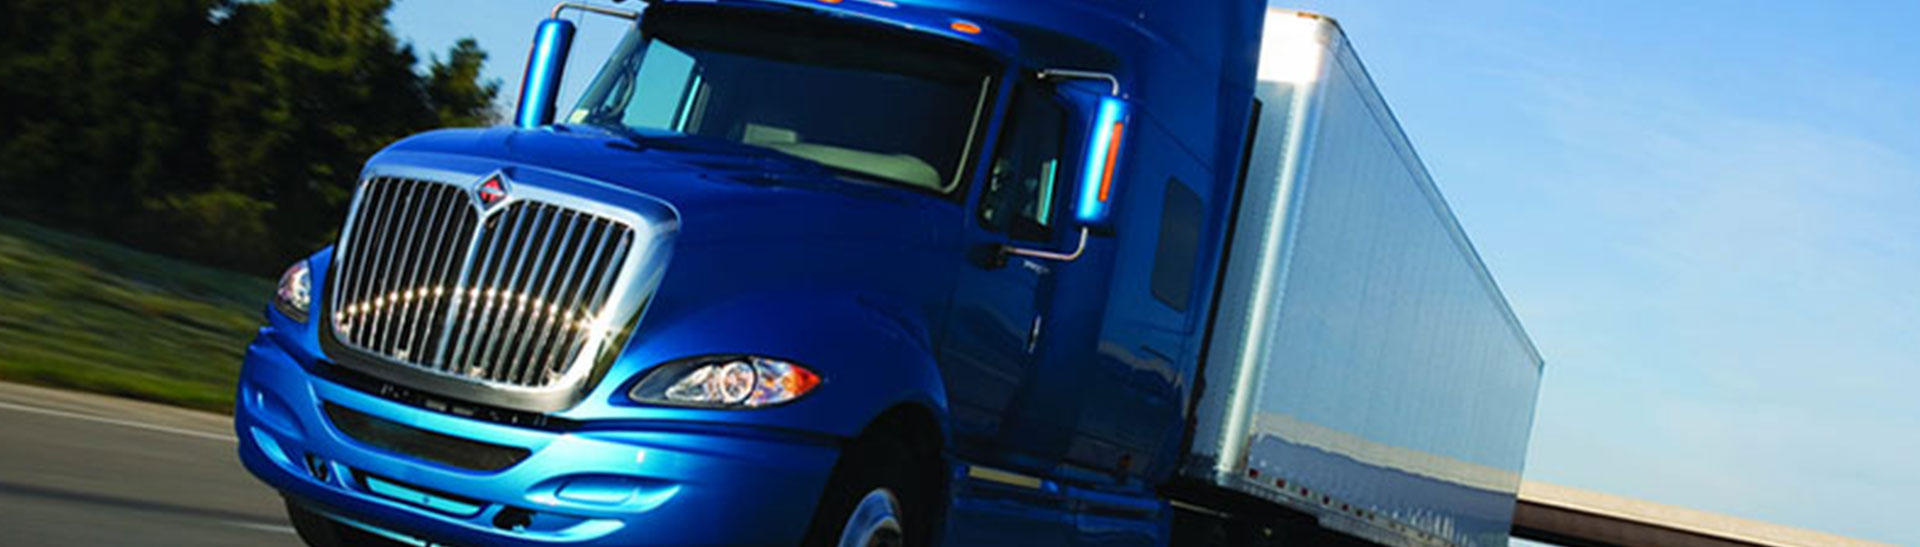 Chicago Trucking Services, Logistics Services and Trucking Company